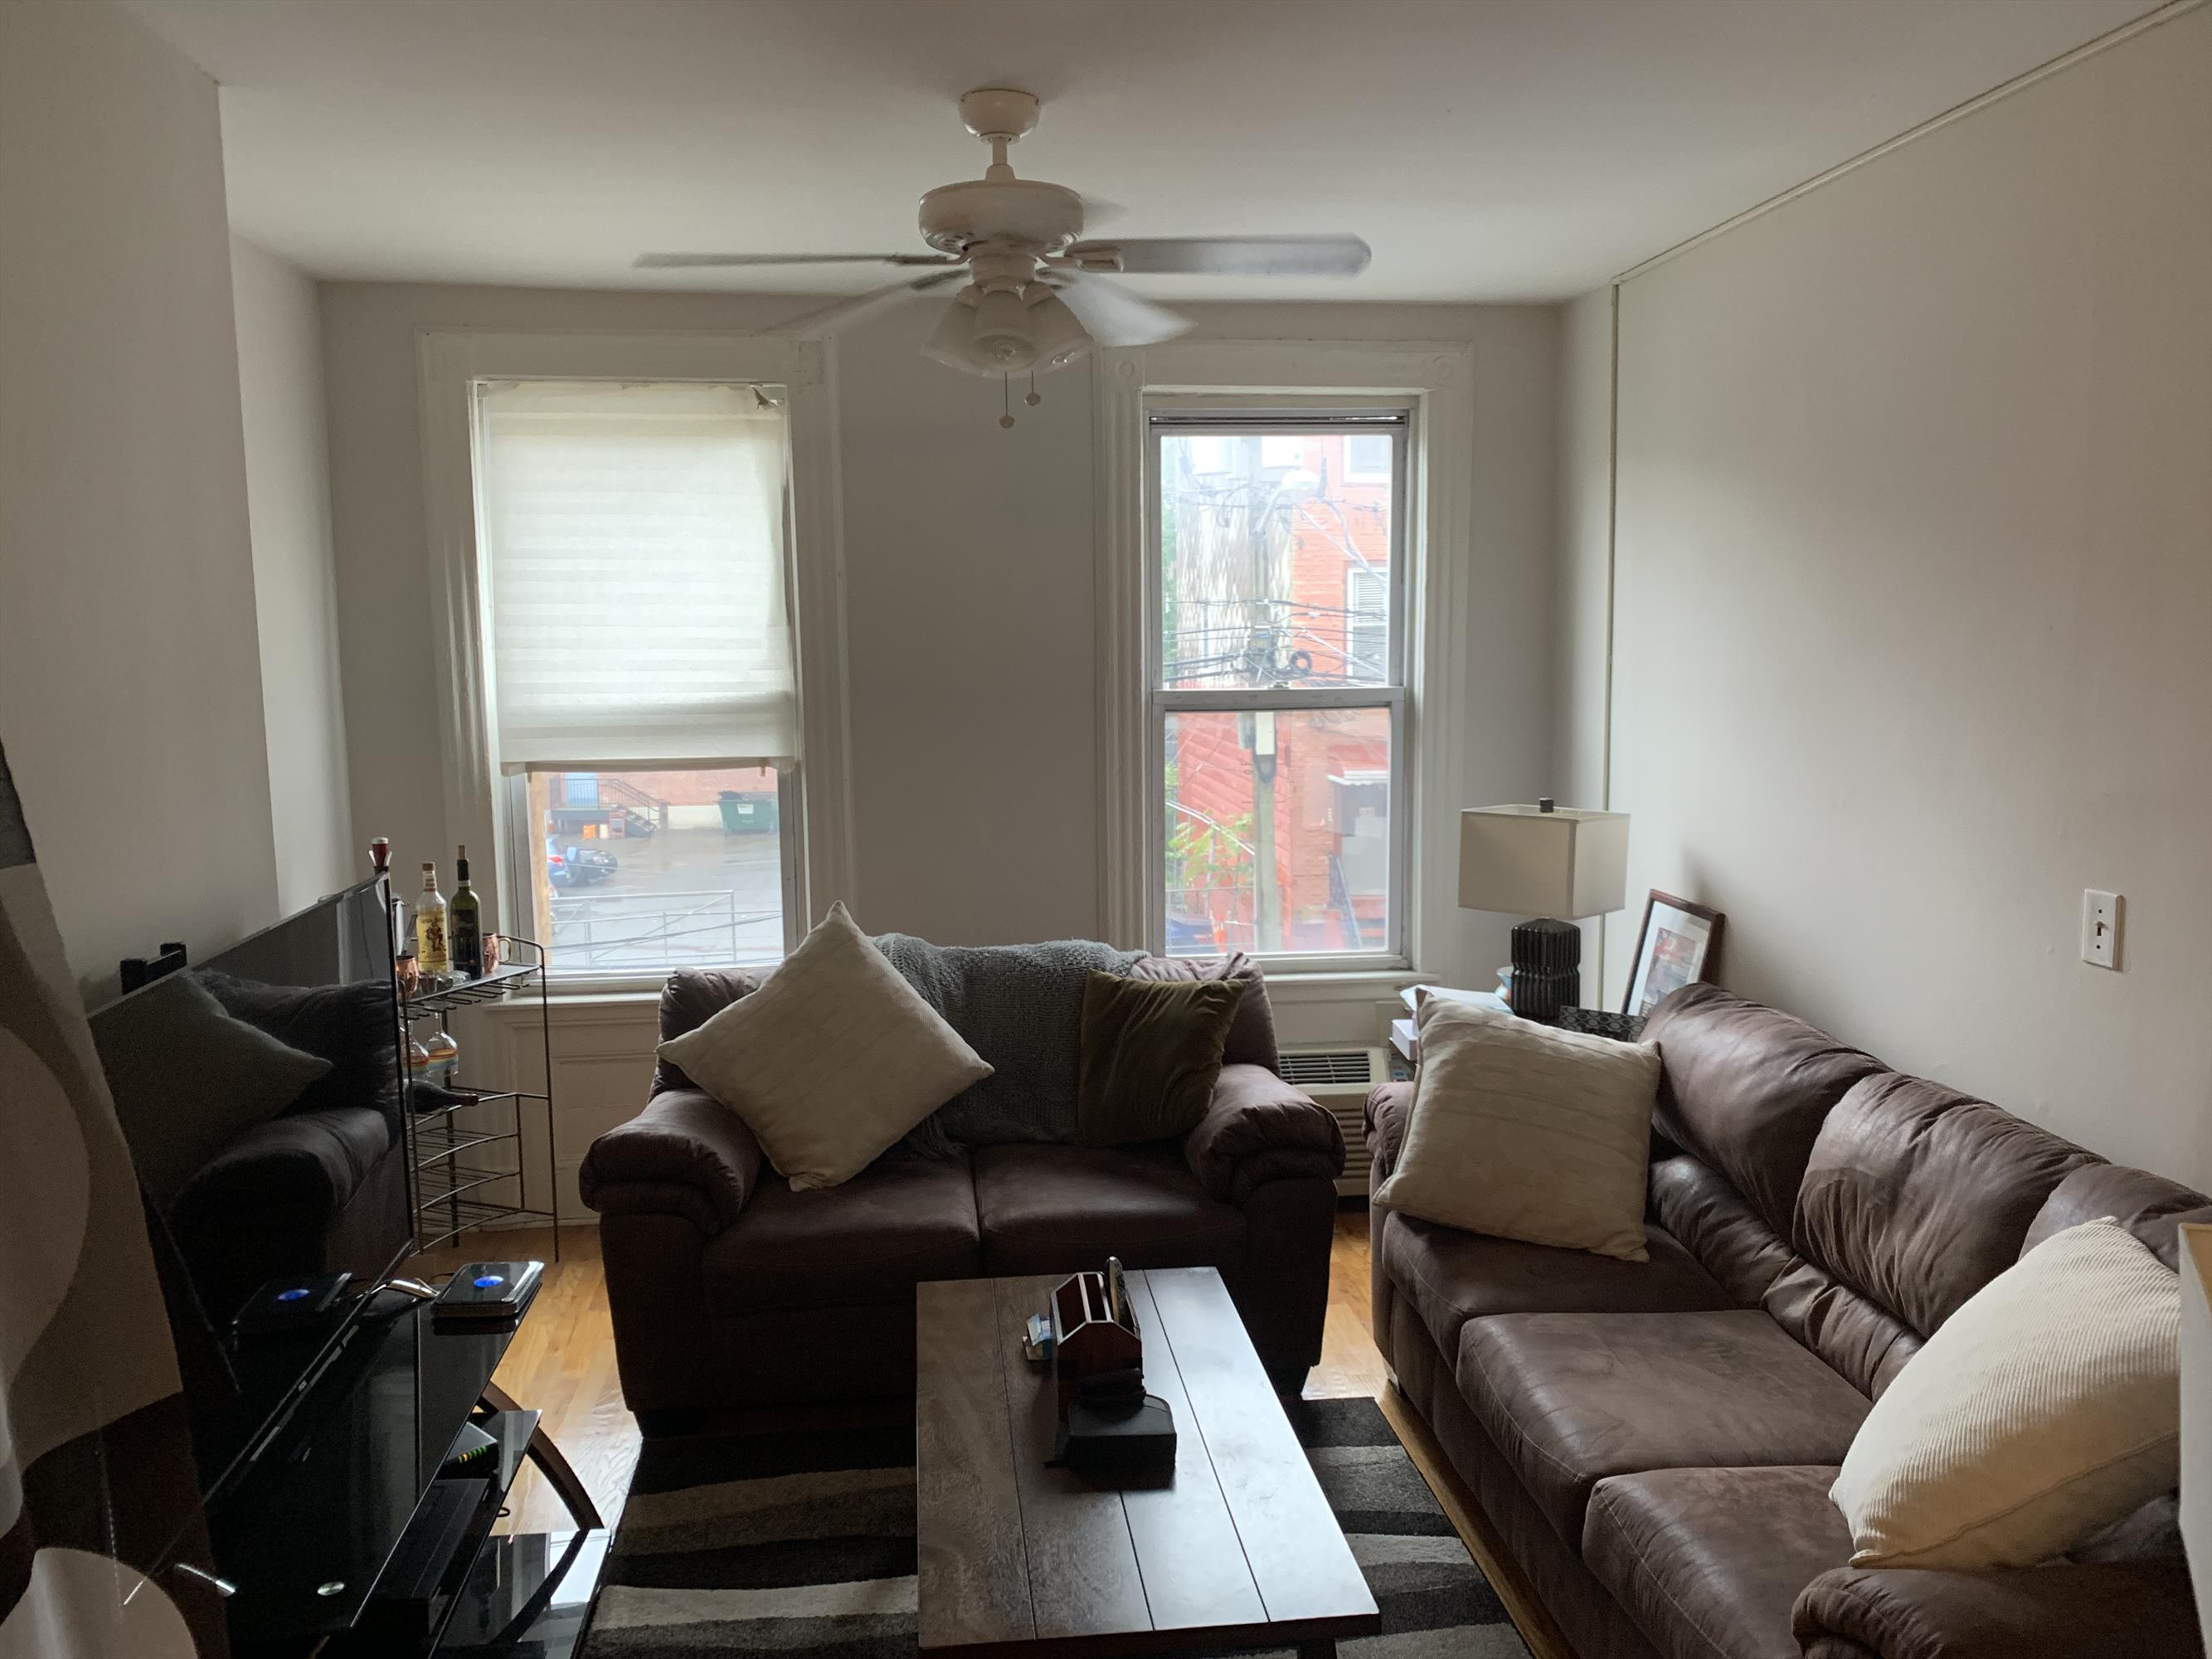 No Fee! You  must see this One Bed One Bath! Great natural light. Hardwood floors throughout. Laundry in building. Steps to train shops and restaurants.

Available for Vacant(Owner Flexible On Move In Date)